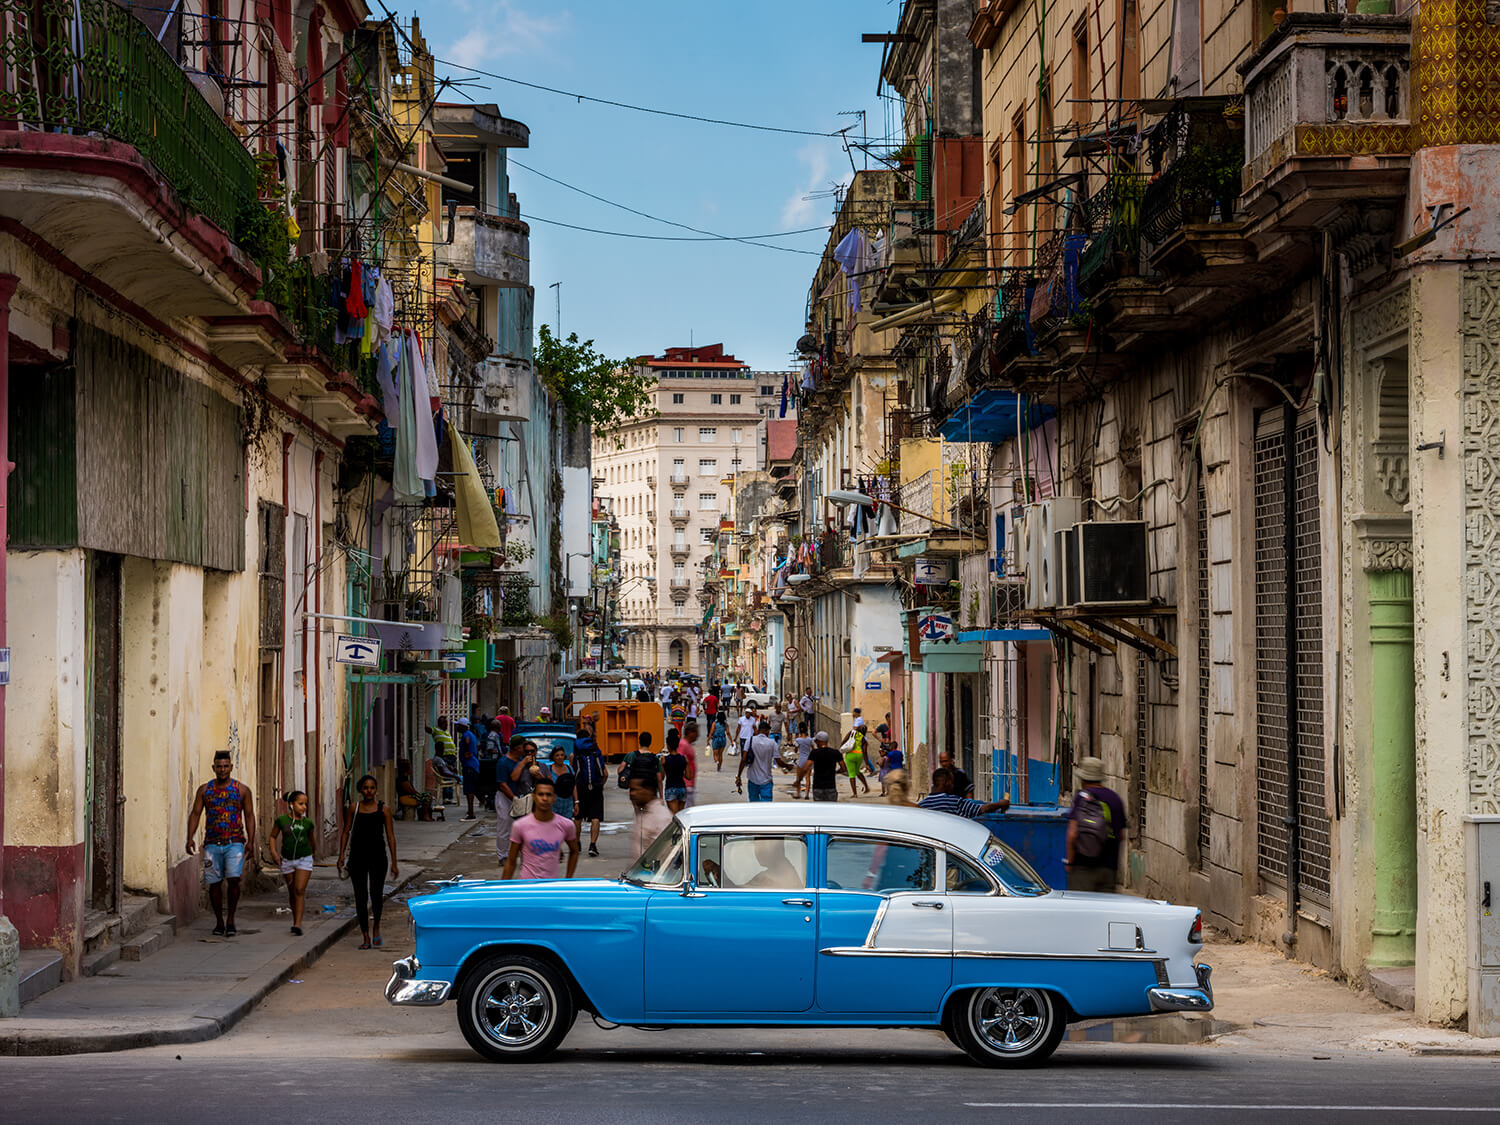 FUJIFILM Exposure Center. Shot down a busy Cuban street with blue vintage American car in foreground.